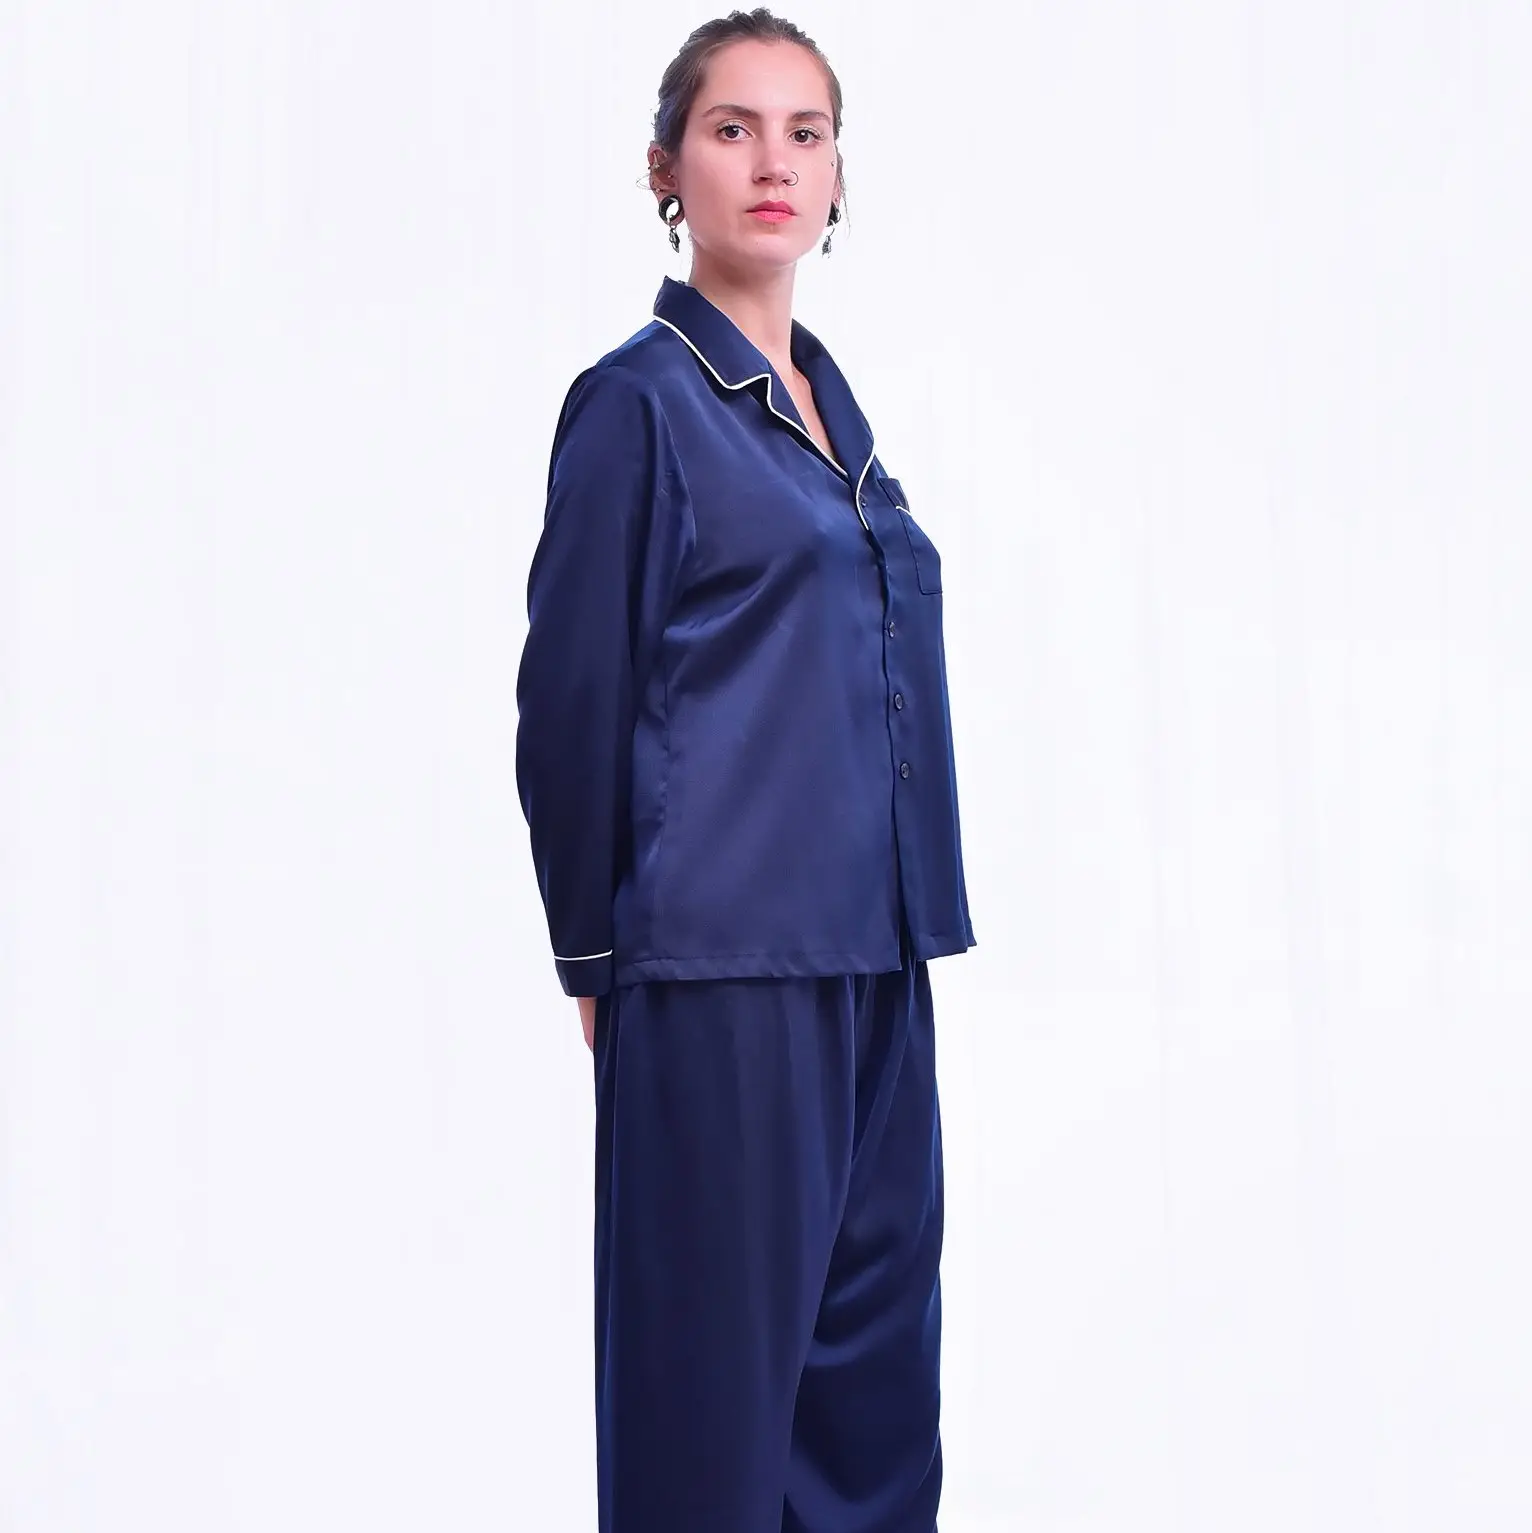 Vietnam High quality Export Home Wear Silks Clothes with Different Color Sleepwear for Men Fashionable